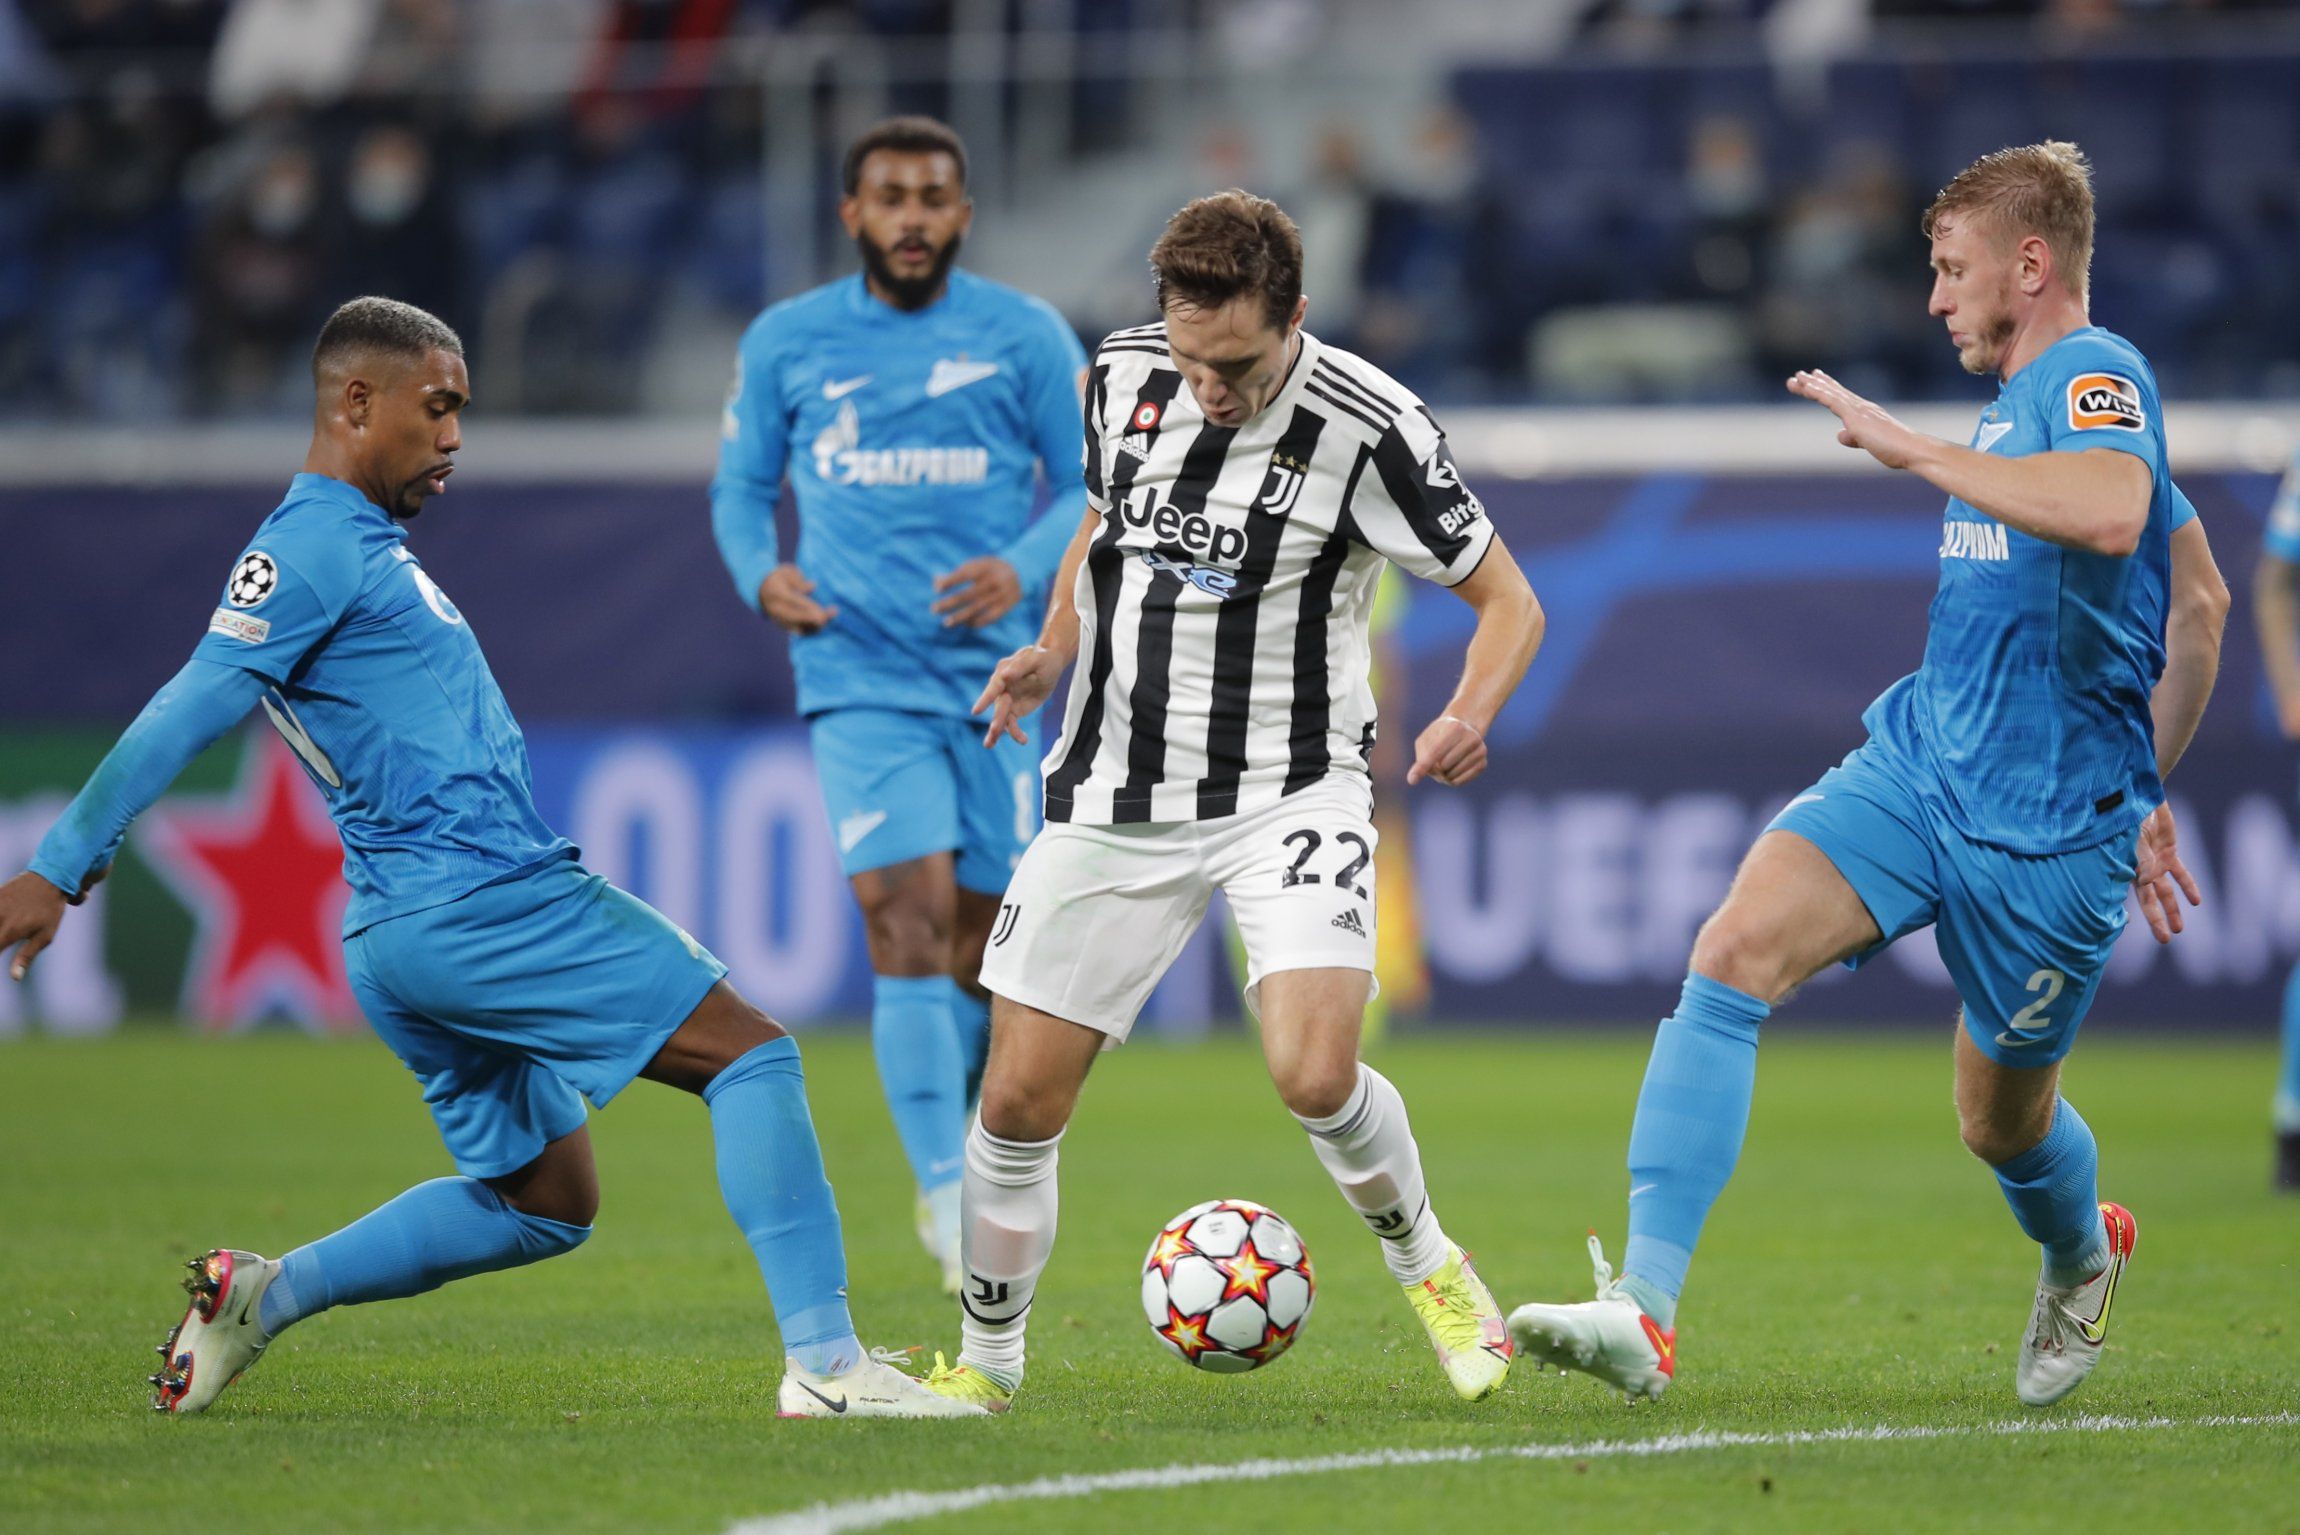 Juventus winger Federico Chiesa in action in the Champions League